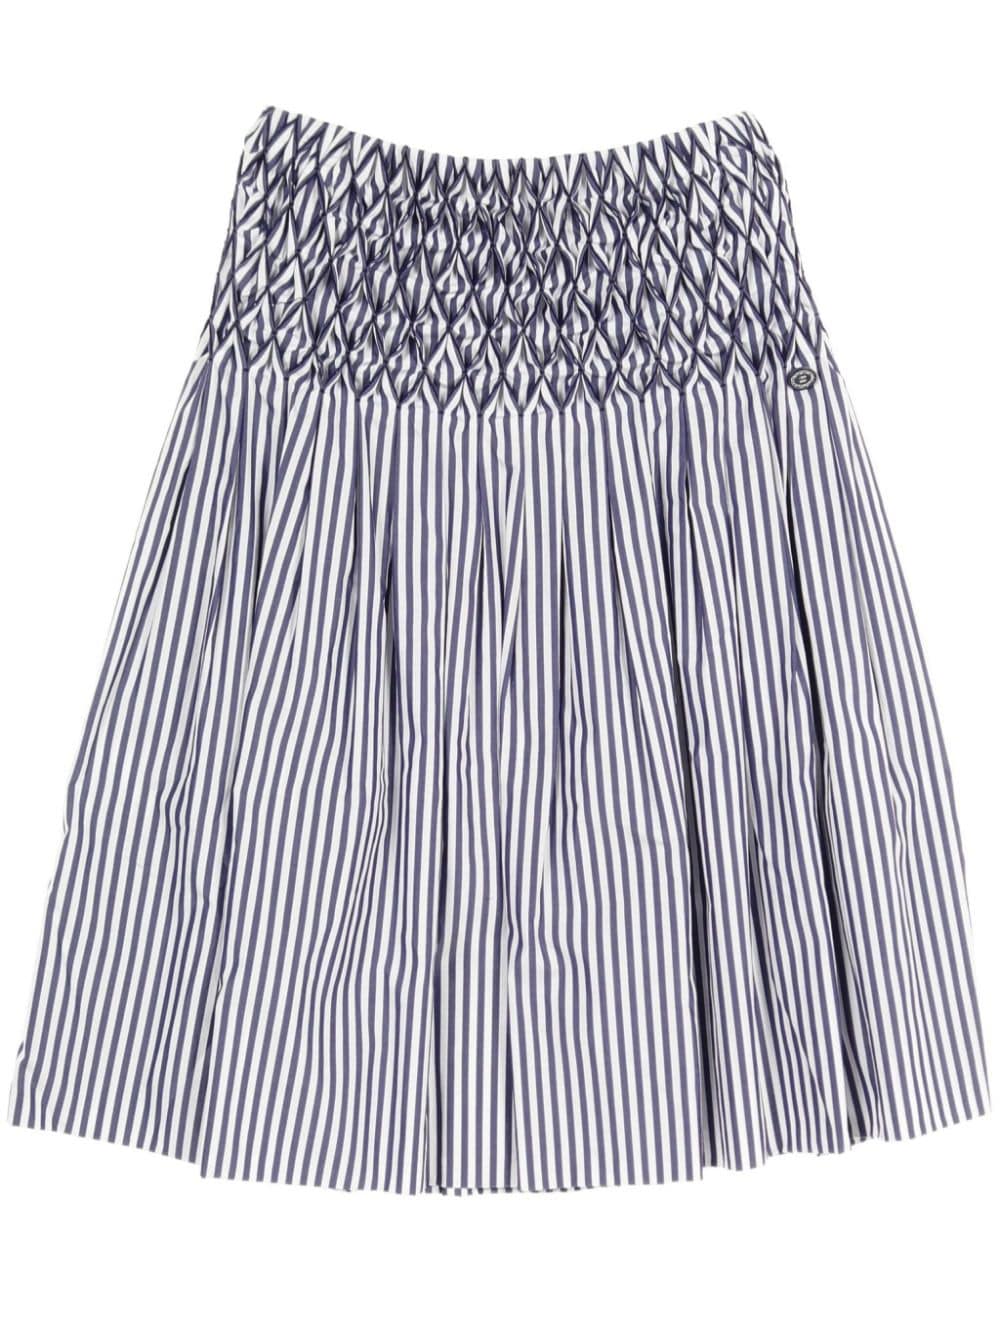 Pre-owned Chanel 1986-1988 Striped Midi Skirt In Blue